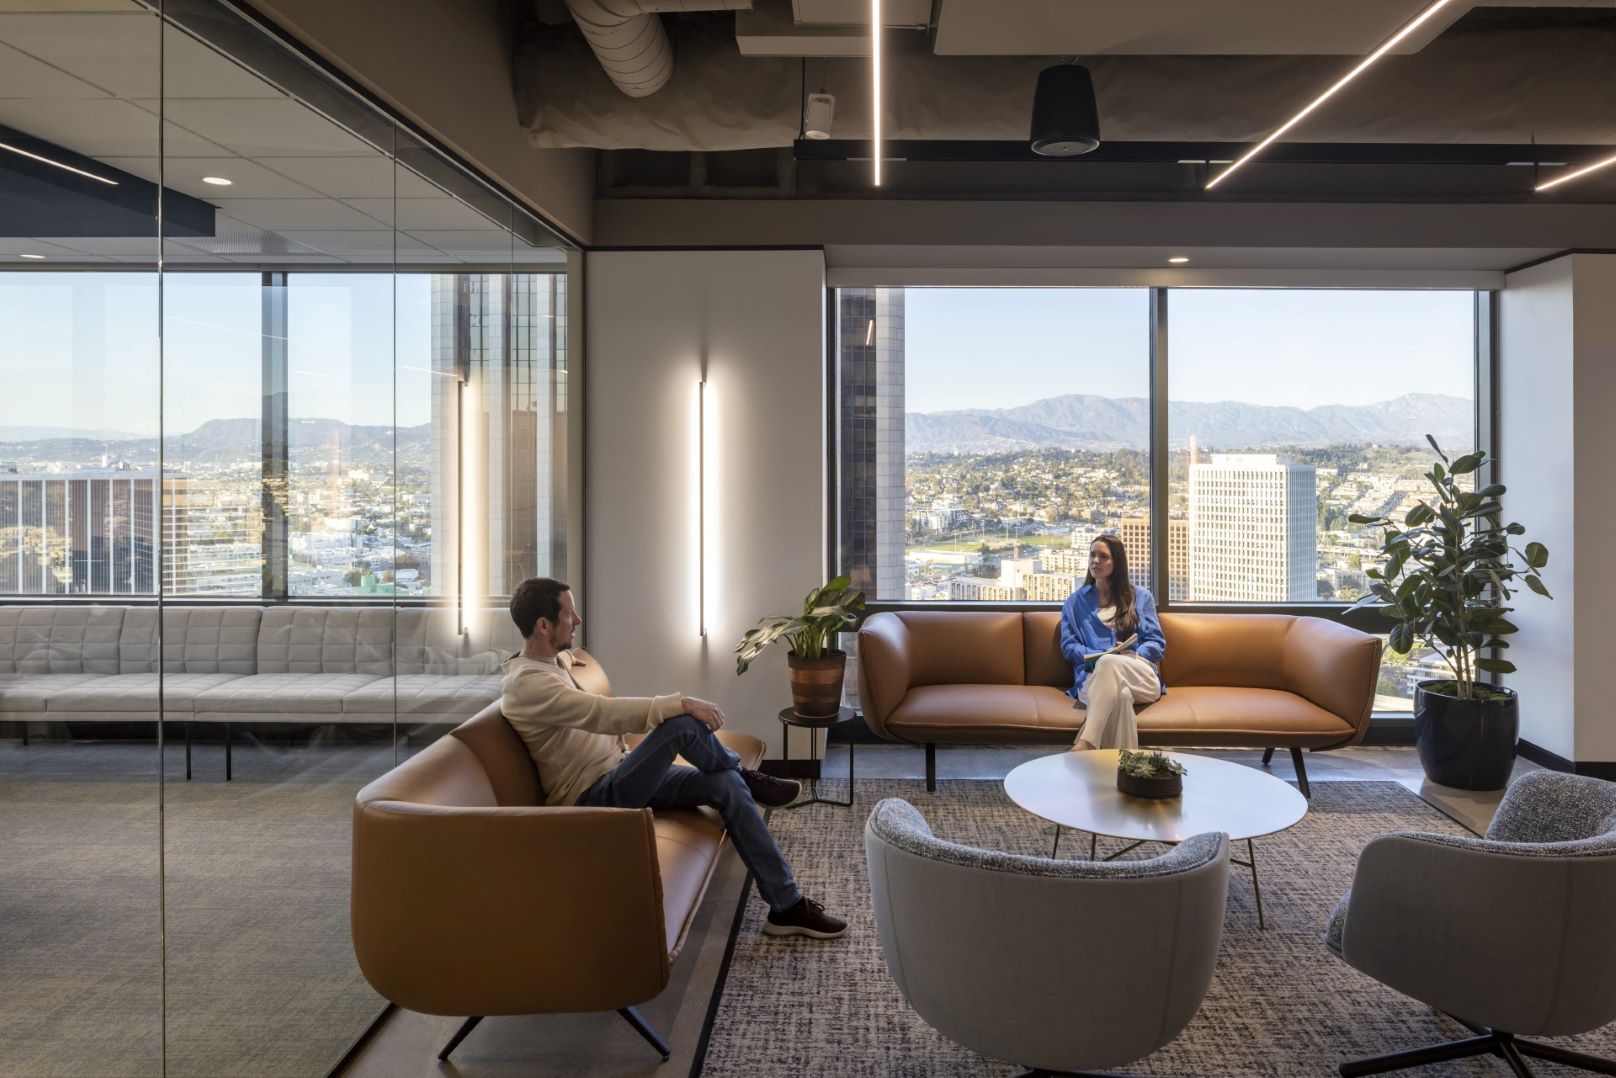 Orrick LA seating area with open view out window